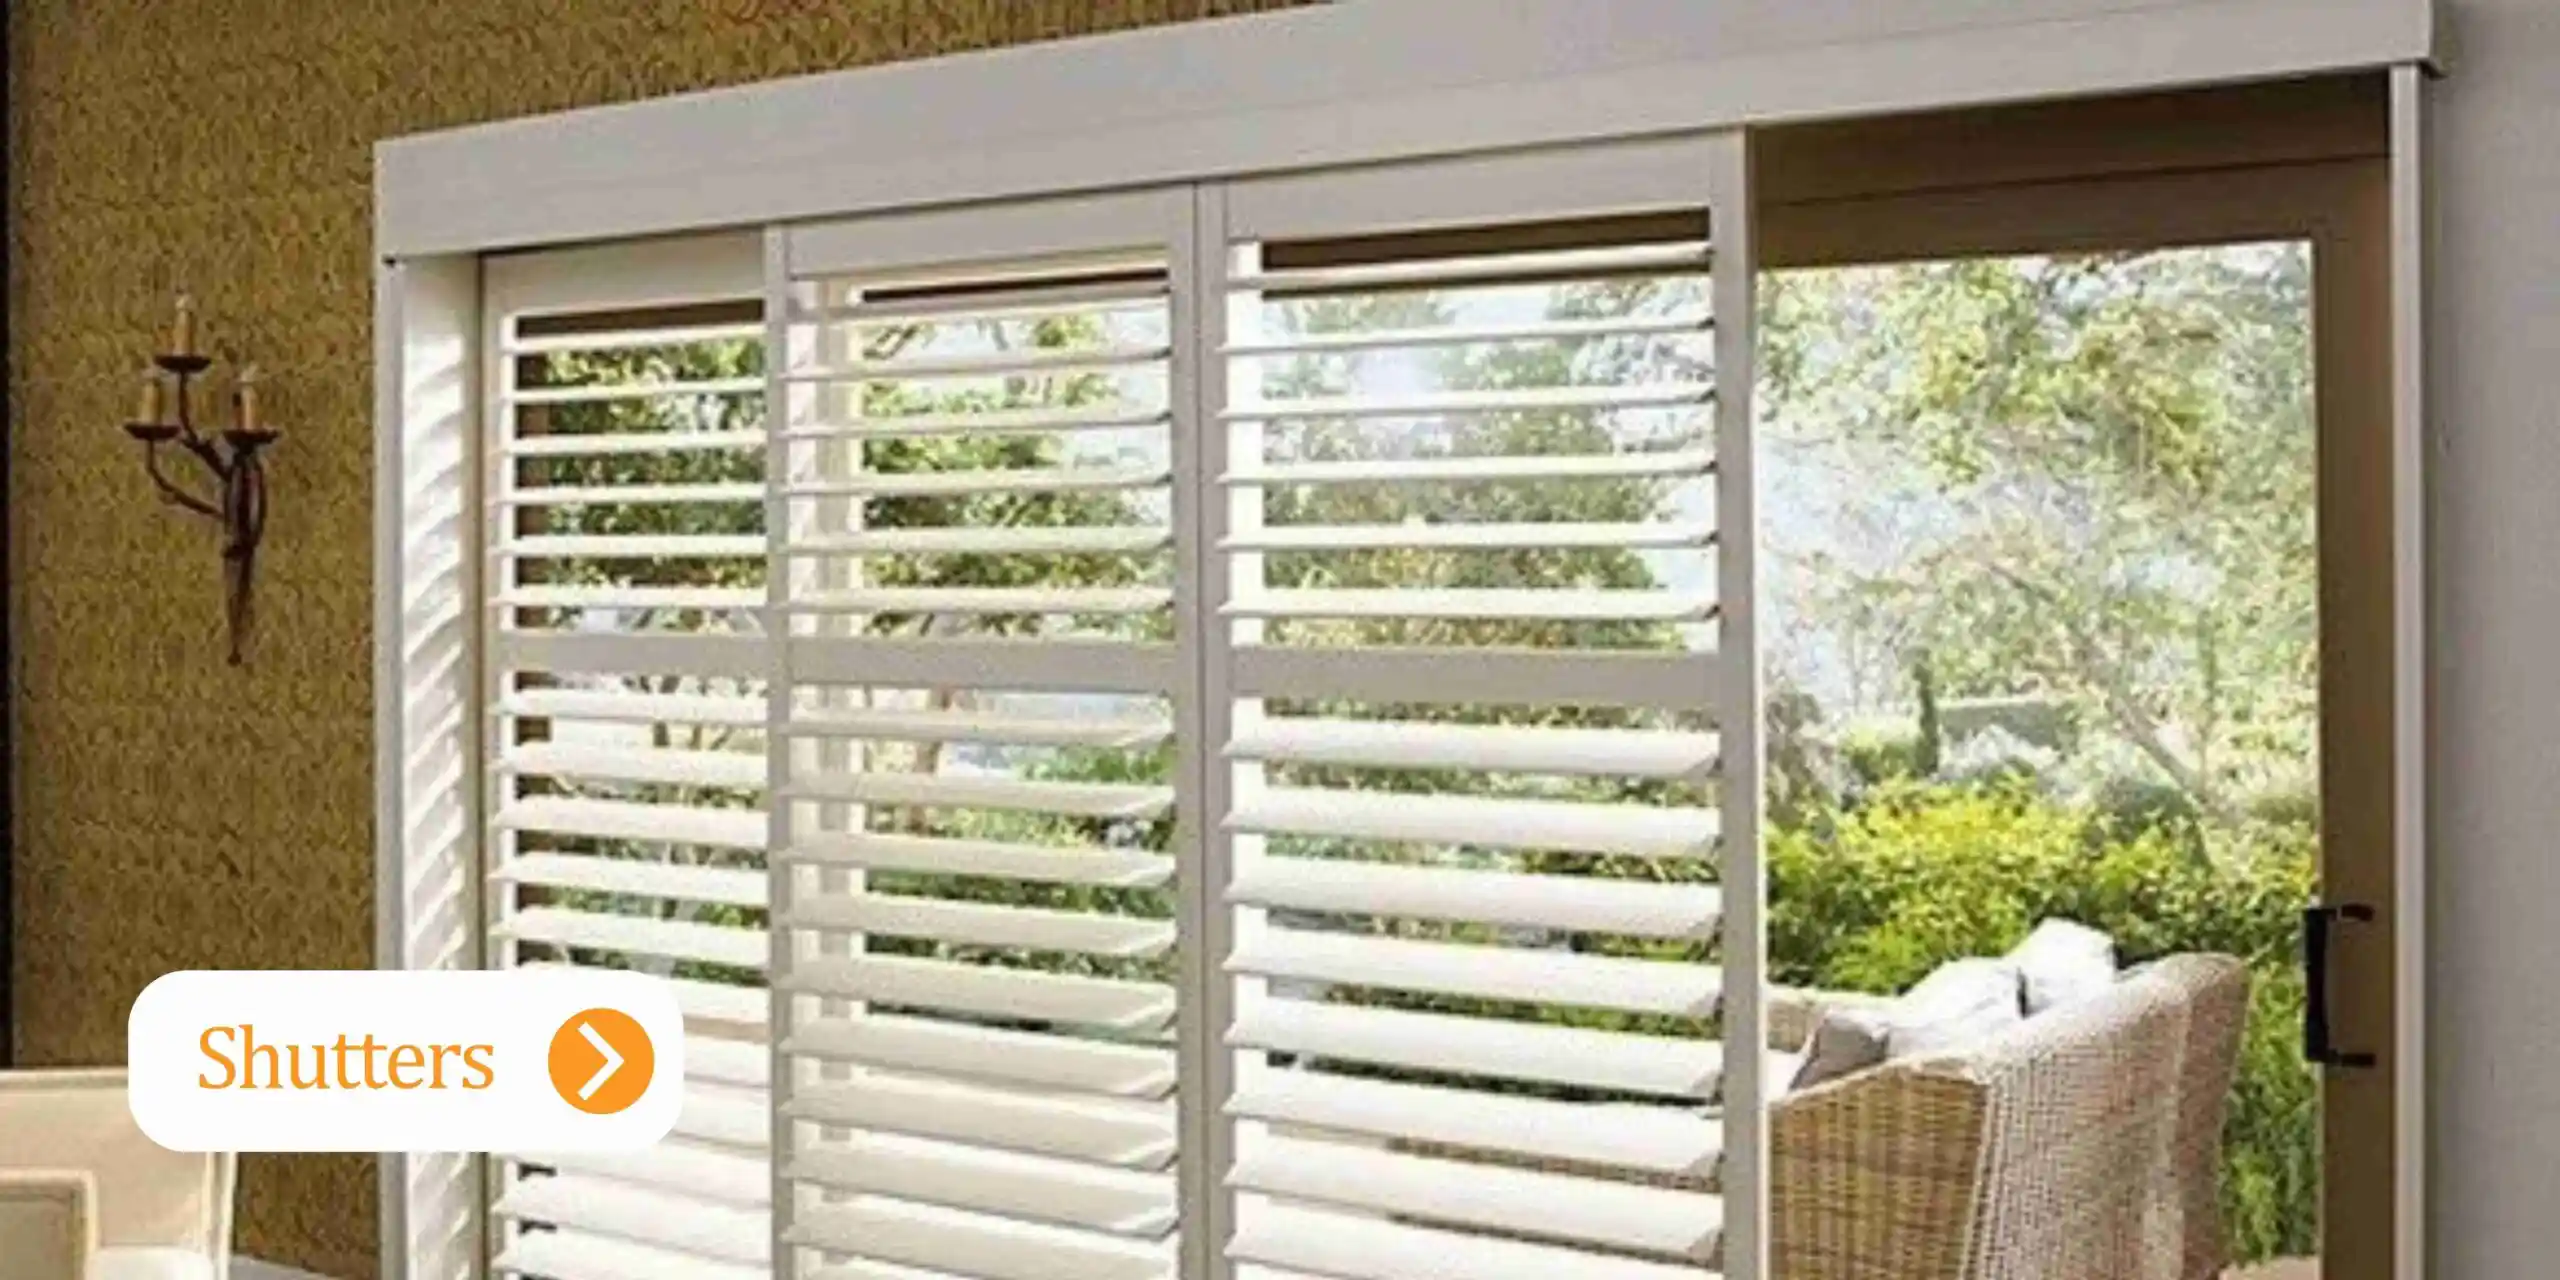 Shutters product